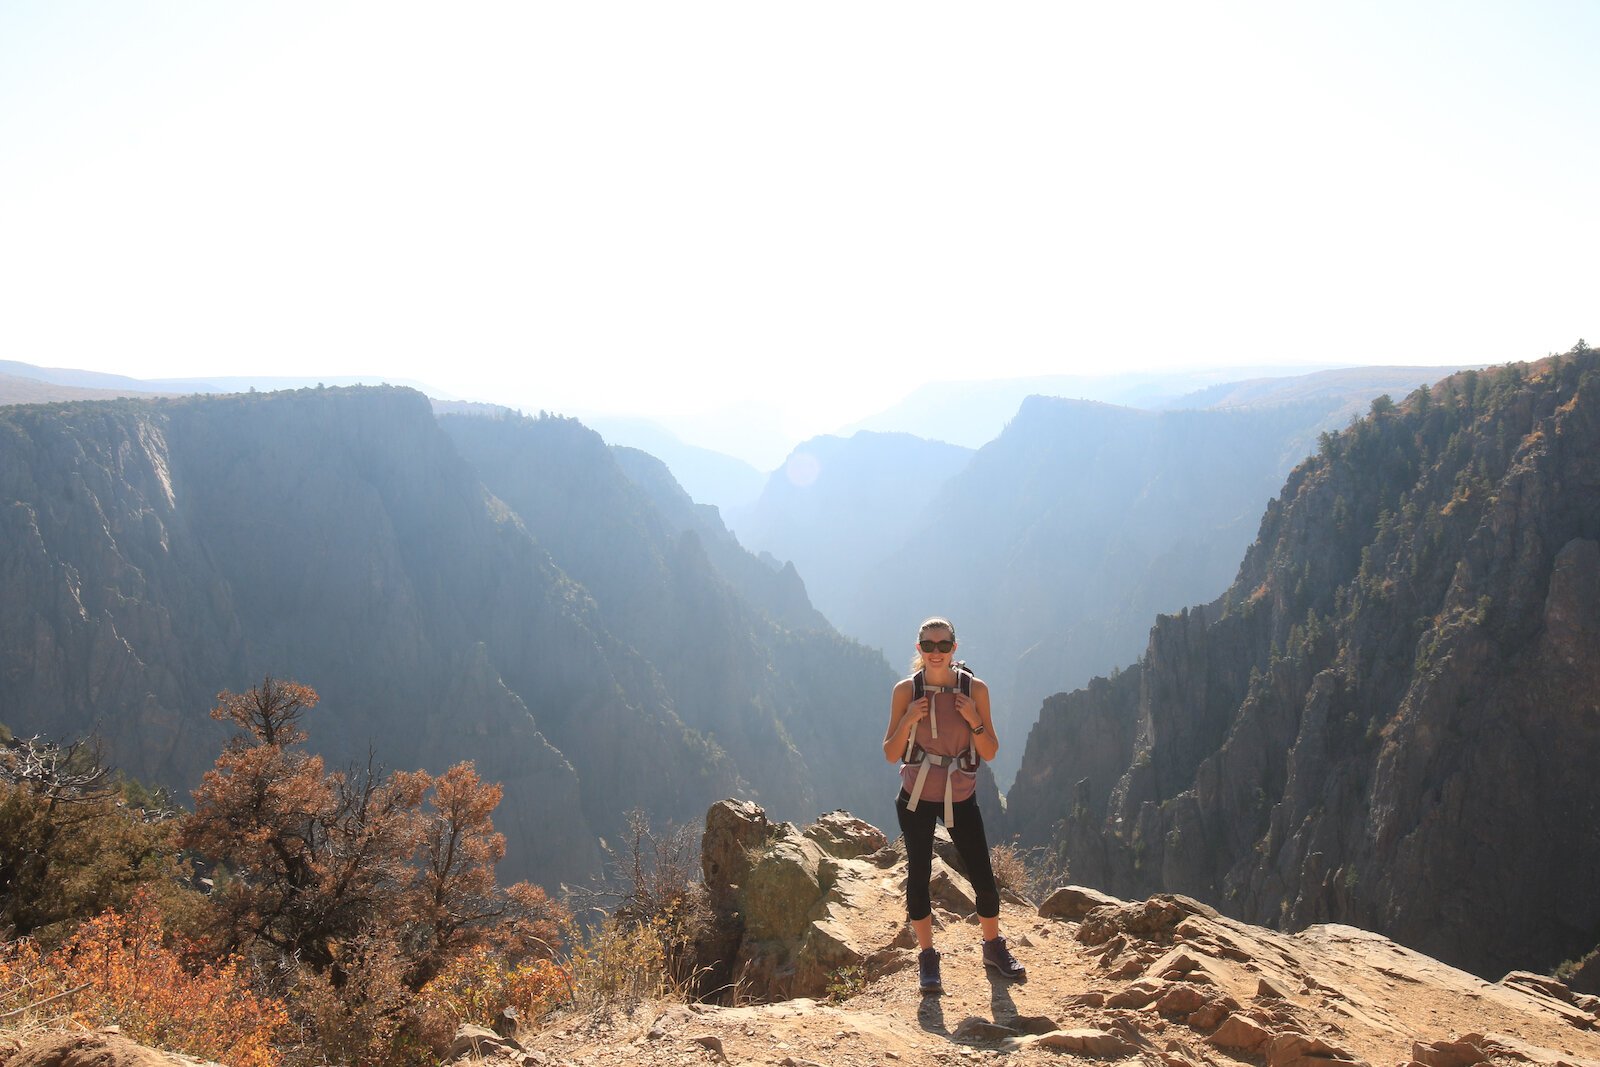 Alexys Esslinger hikes through Black Canyon of the Gunnison National Park in Colorado.